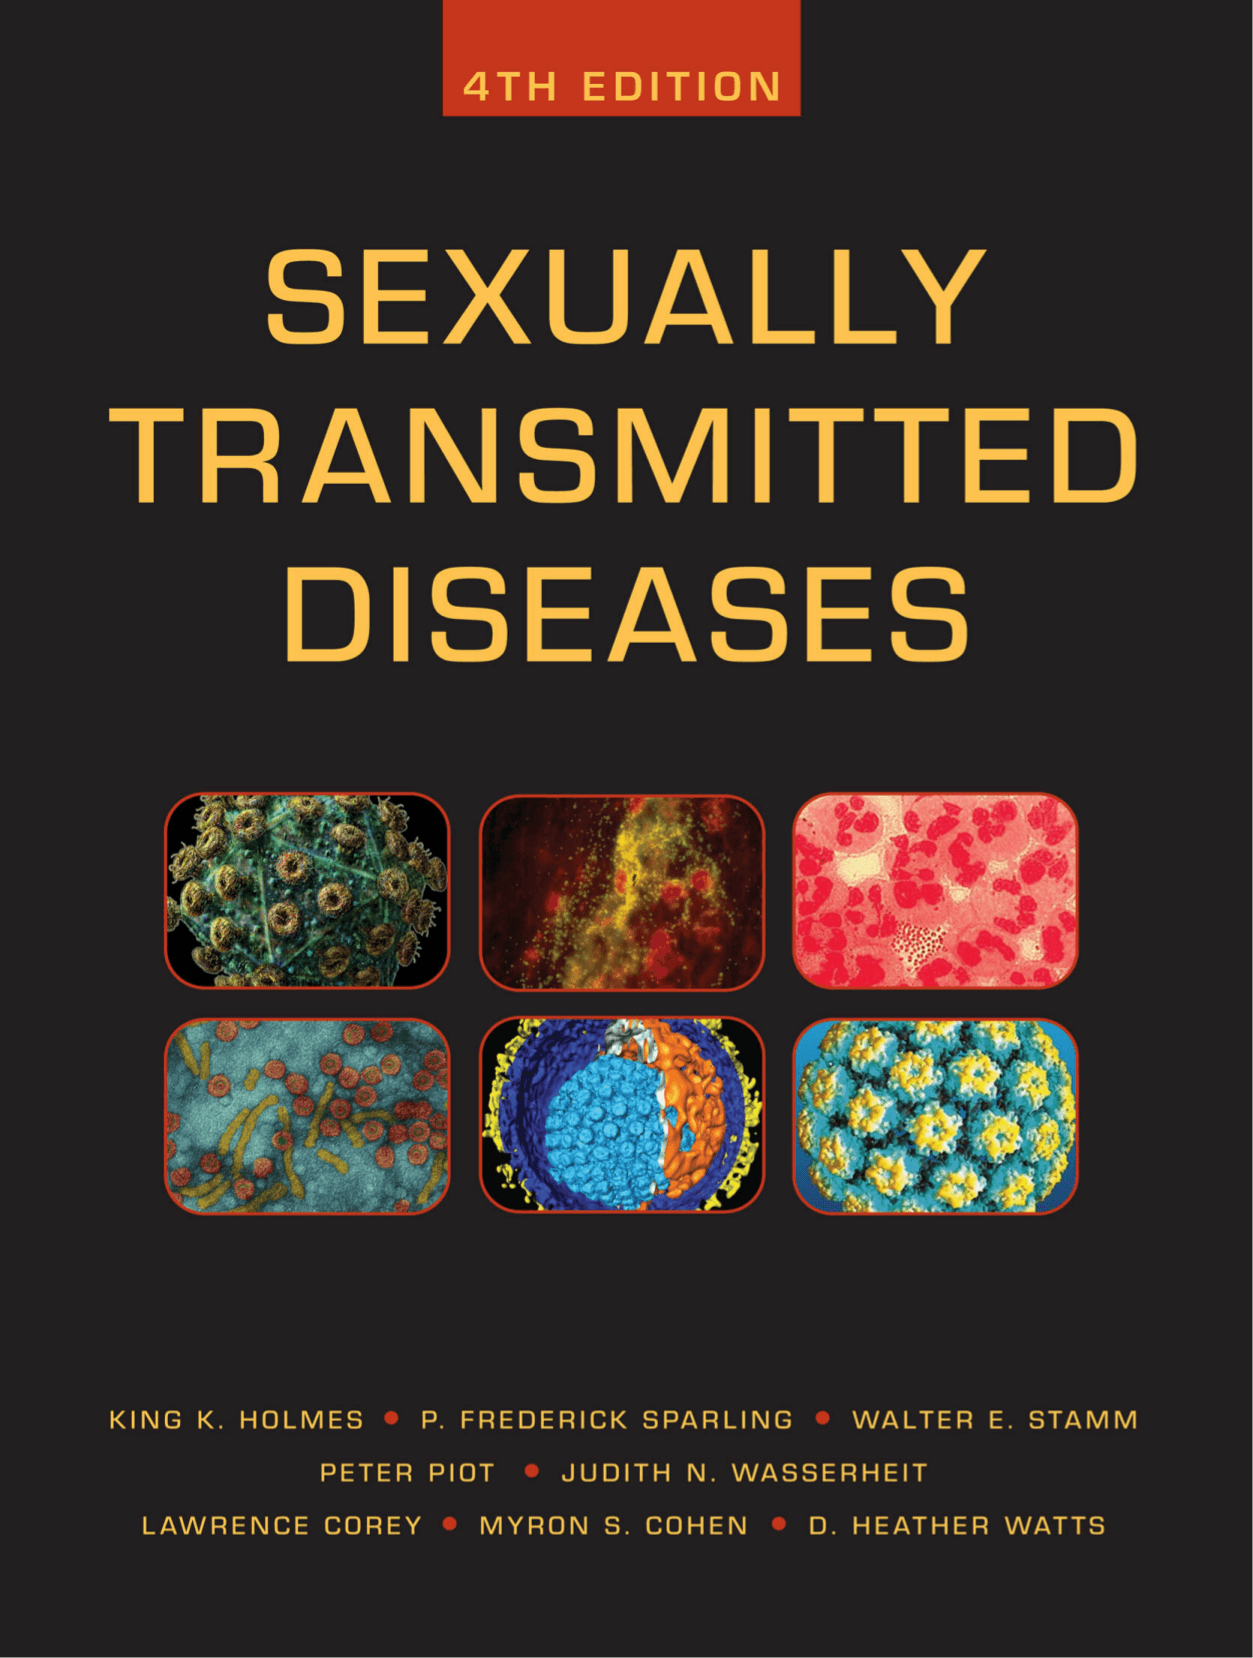 Sexually Transmitted Diseases Fourth 4th Edition By King K